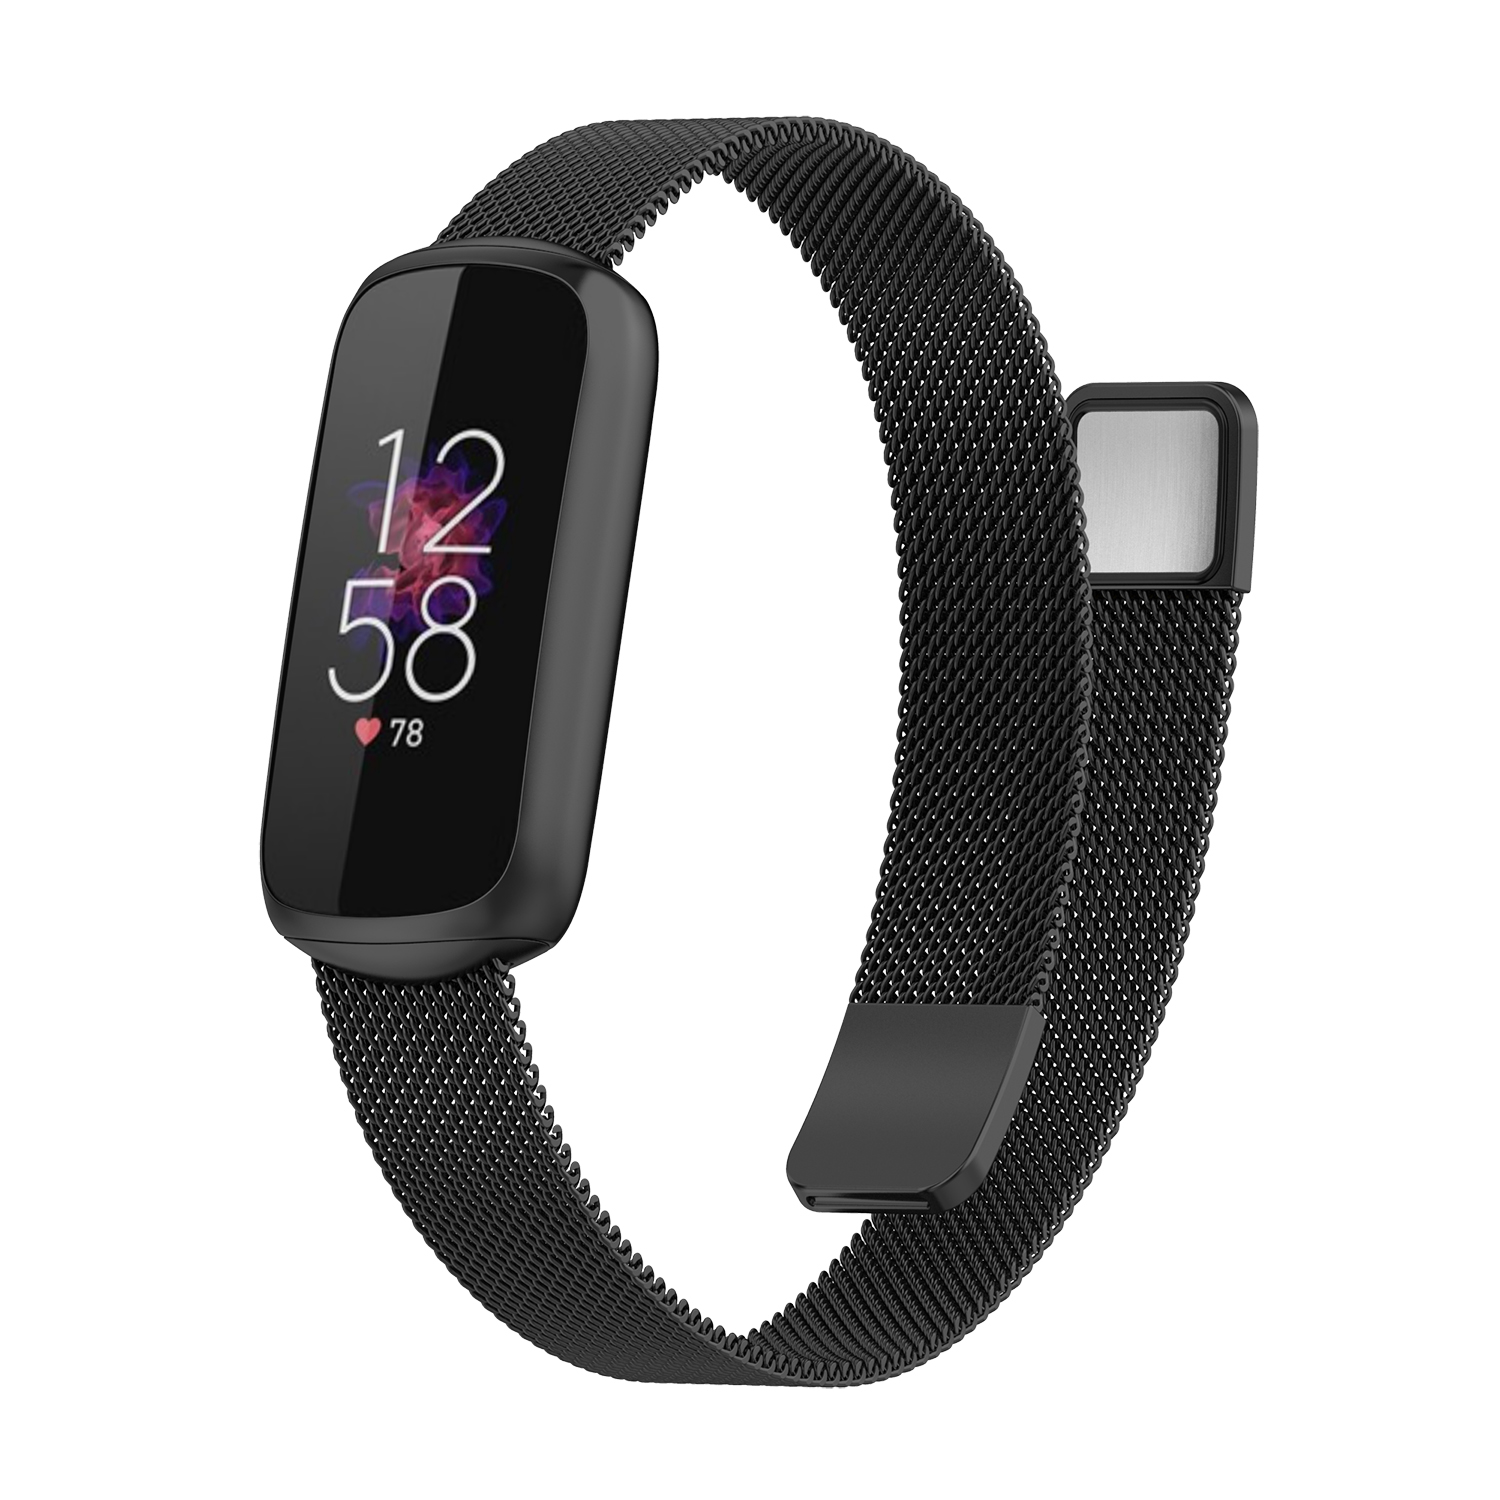 Find Bakeey Magnetic Metal Watch Band Strap Replacement for Fitbit Luxe for Sale on Gipsybee.com with cryptocurrencies